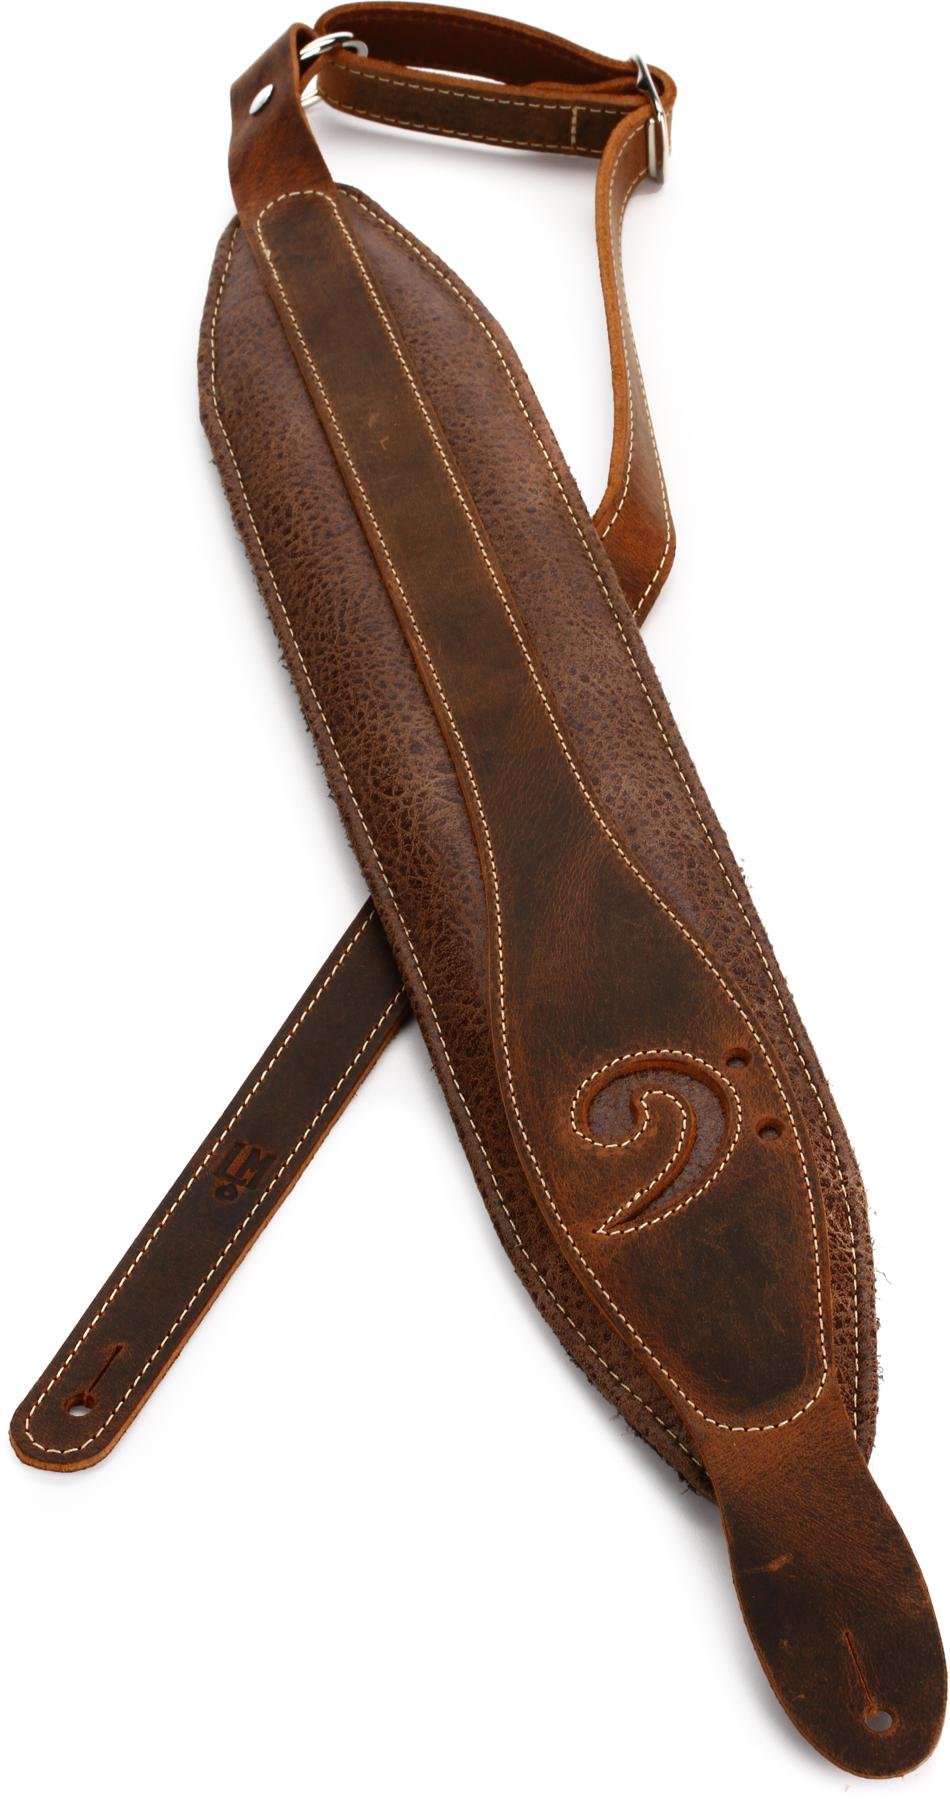 LM Products X-Clef Worn Leather Bass Strap - Brown | Sweetwater